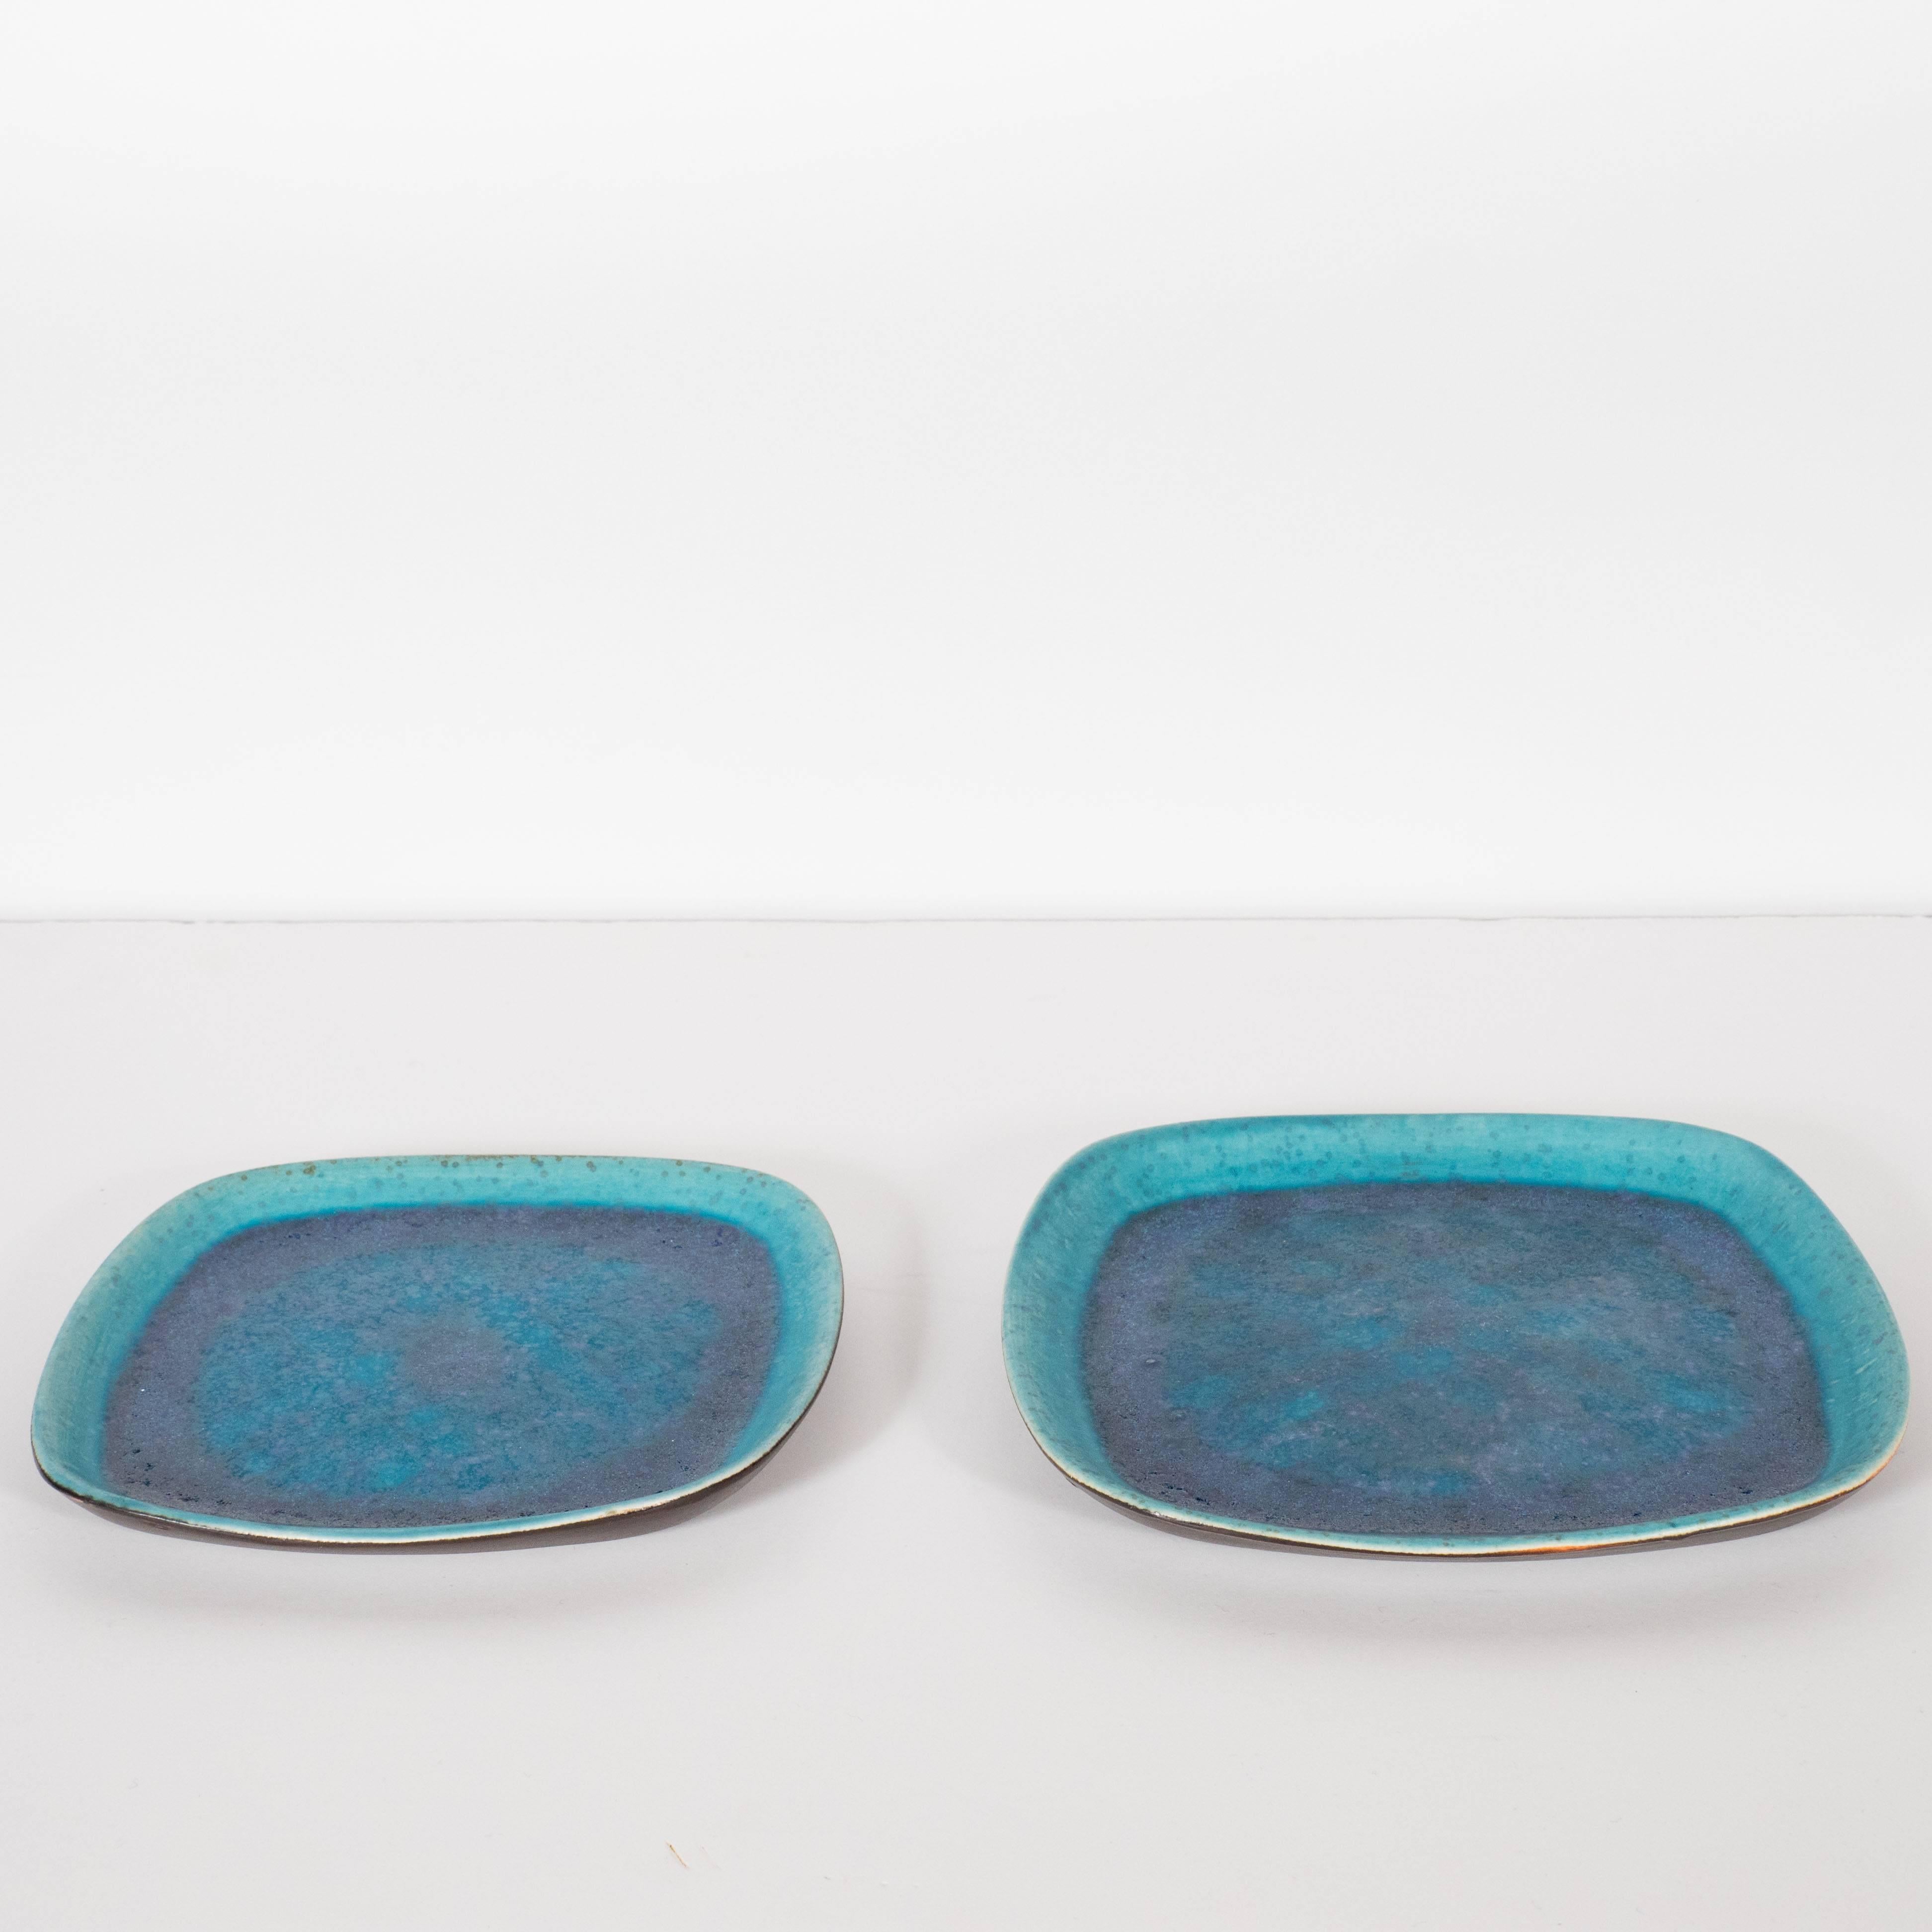 This stunning pair of Mid-Century Modern trays were realized in the United States, circa 1966, by Francis Joseph Von Tury. Born into a family that had operated its own ceramic plant in Transylvania for four generations, Mr. Von Tury spent his